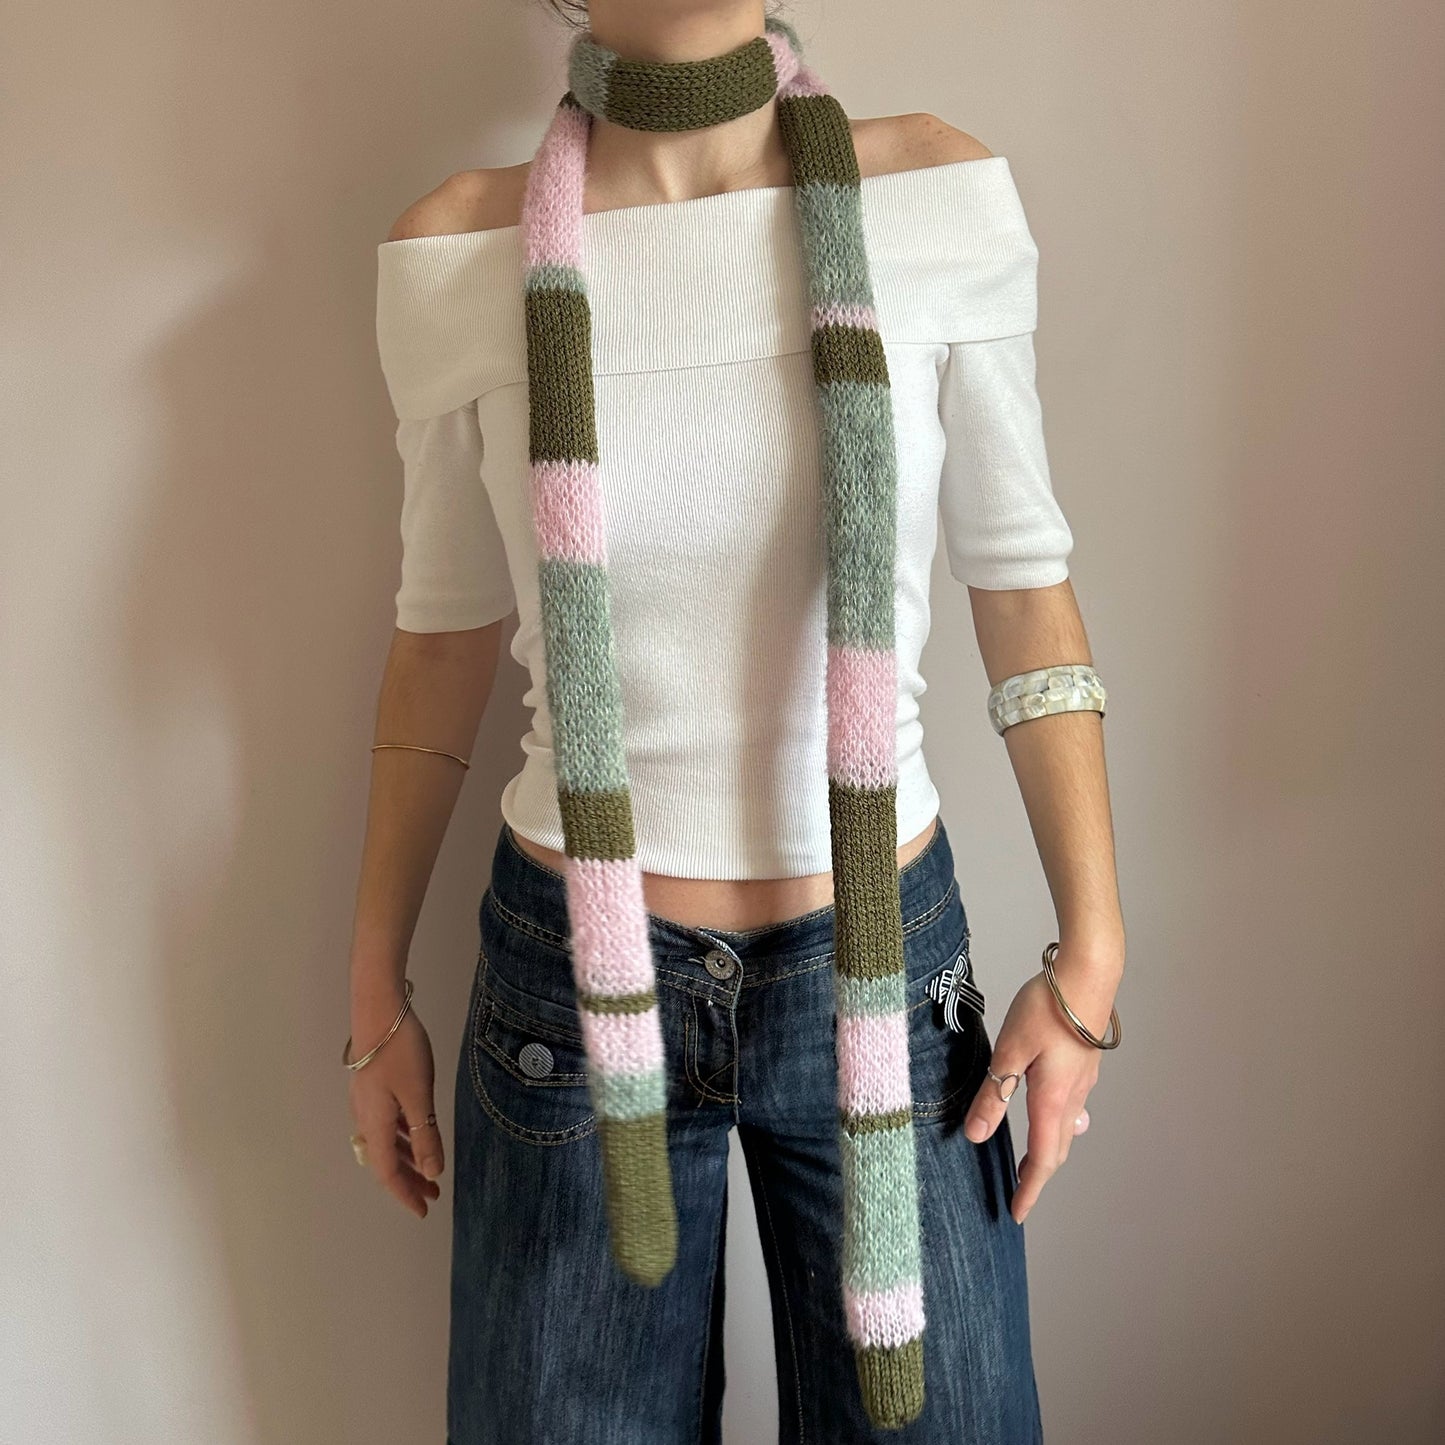 Handmade knitted baby pink, khaki and sage green striped skinny scarf - extra long